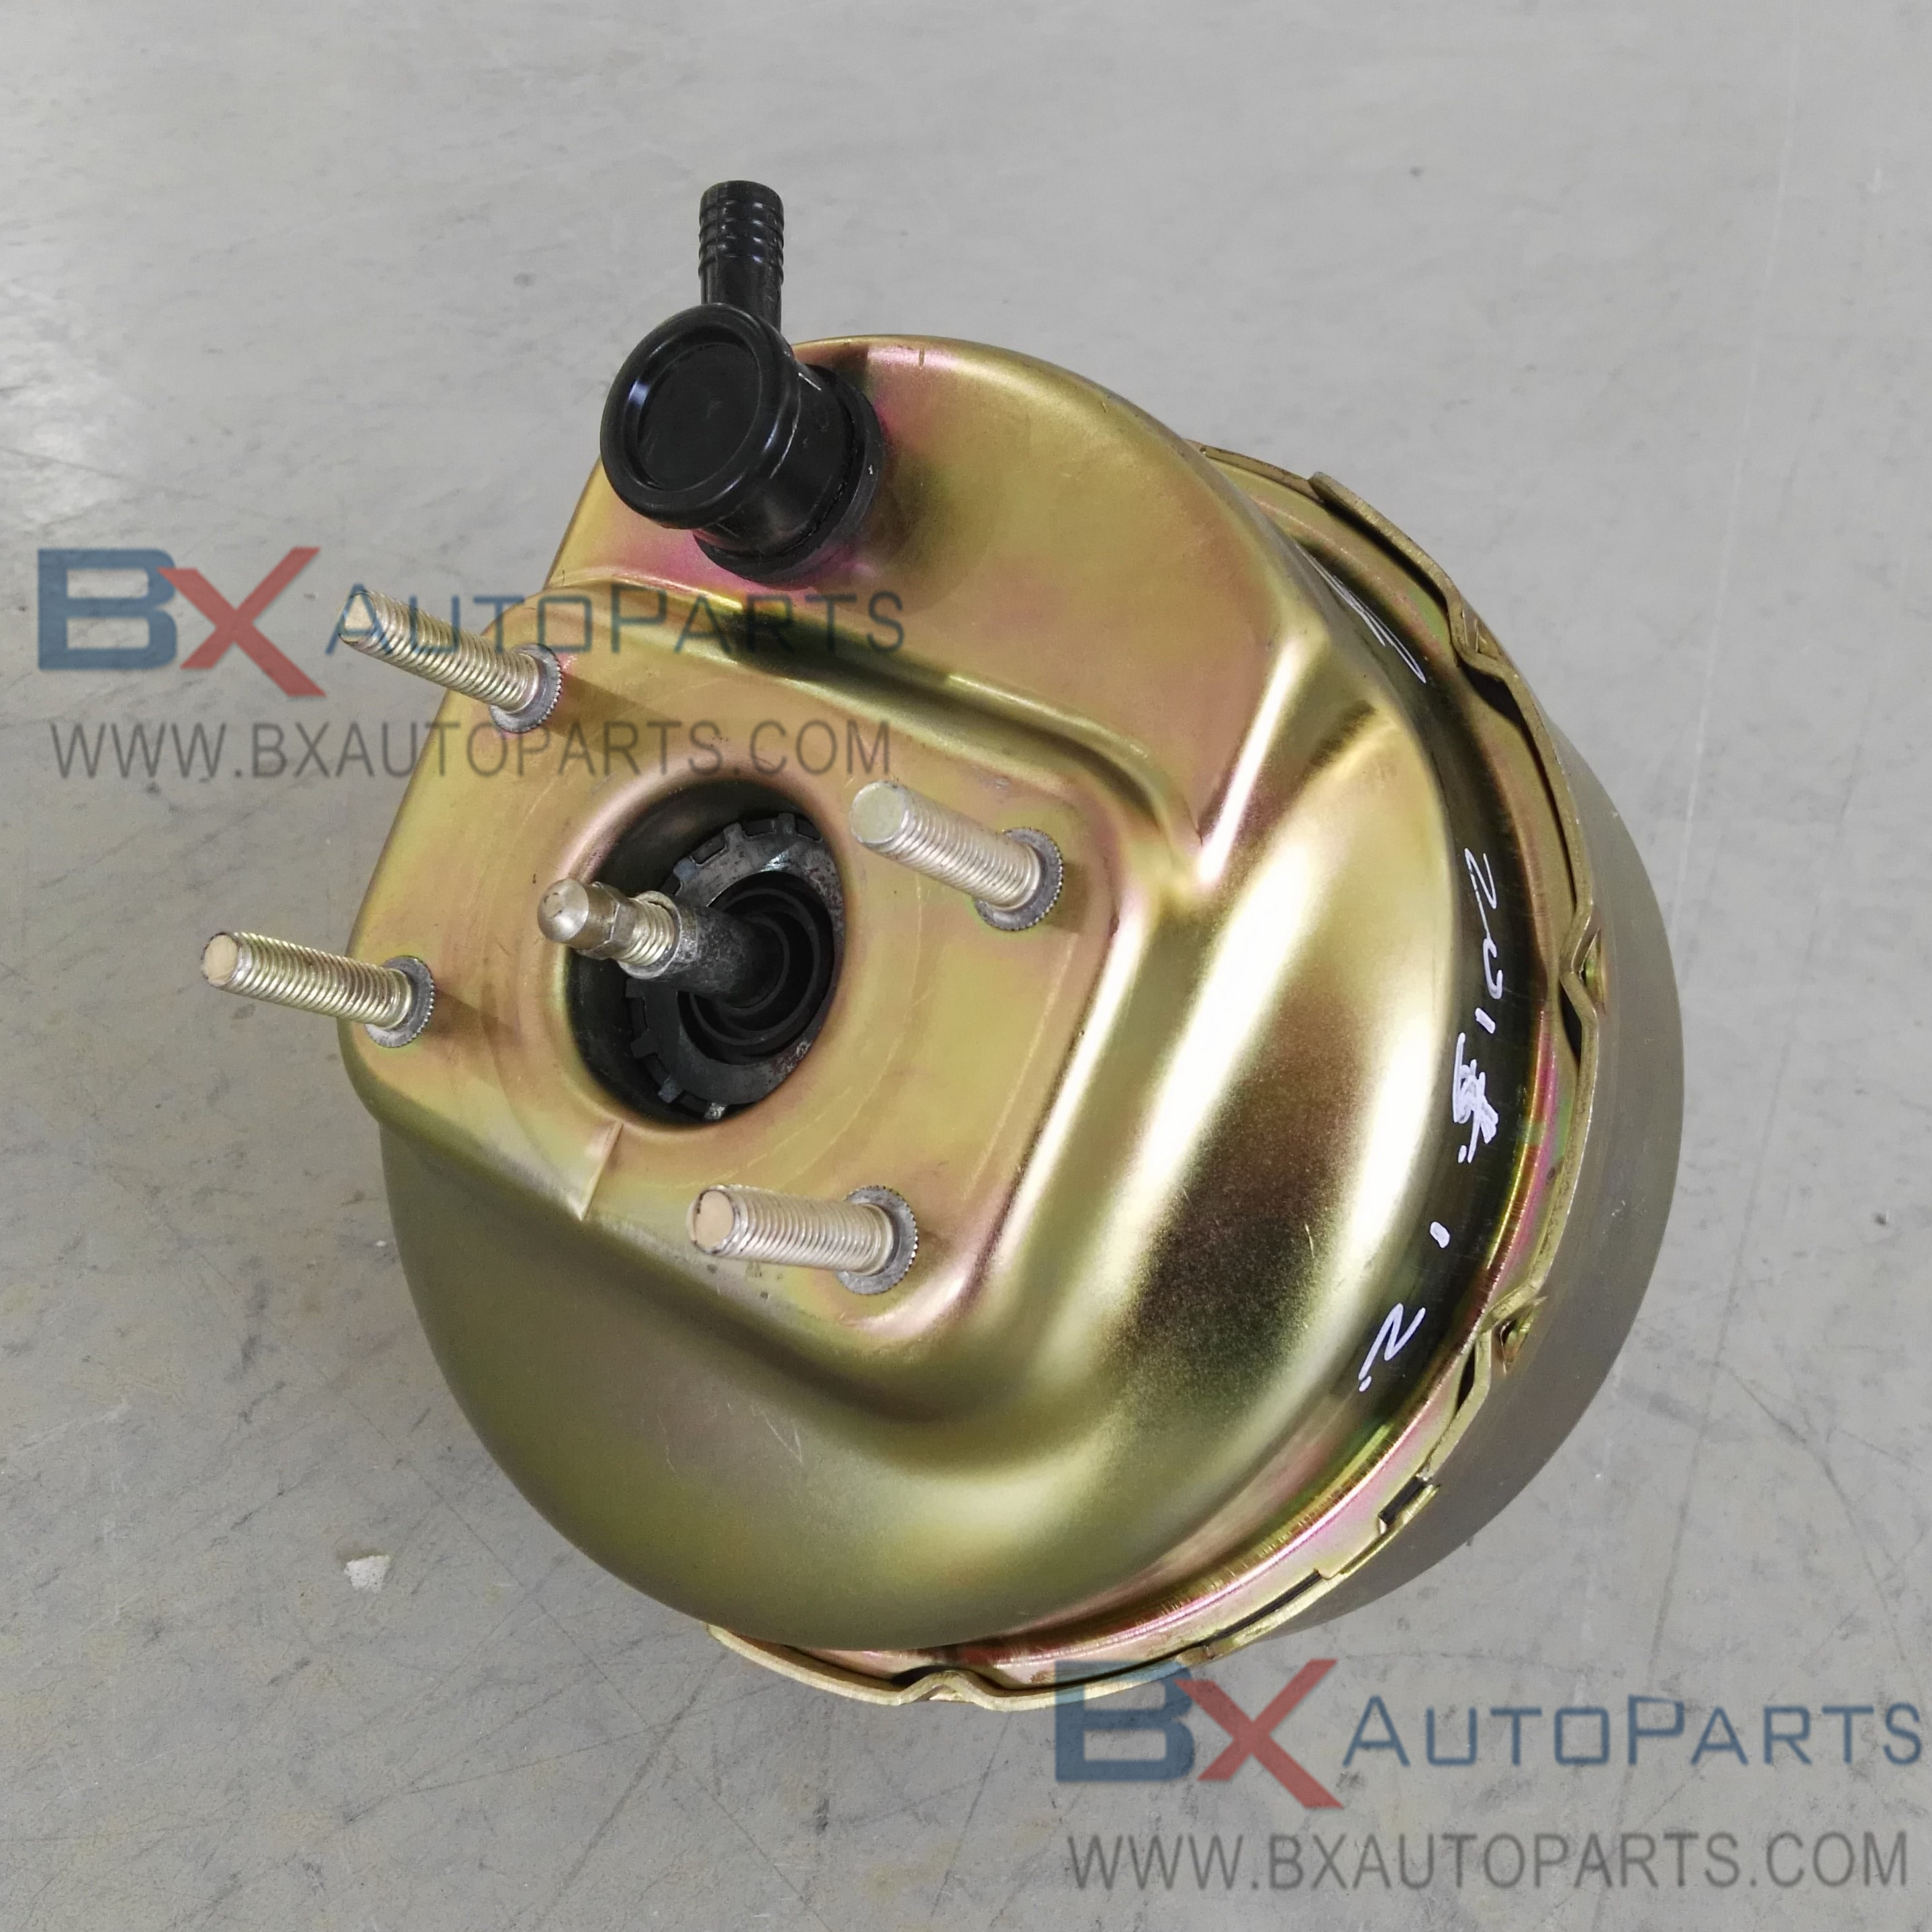 BRAKE BOOSTER FOR Ford Mustang 4BOLTS